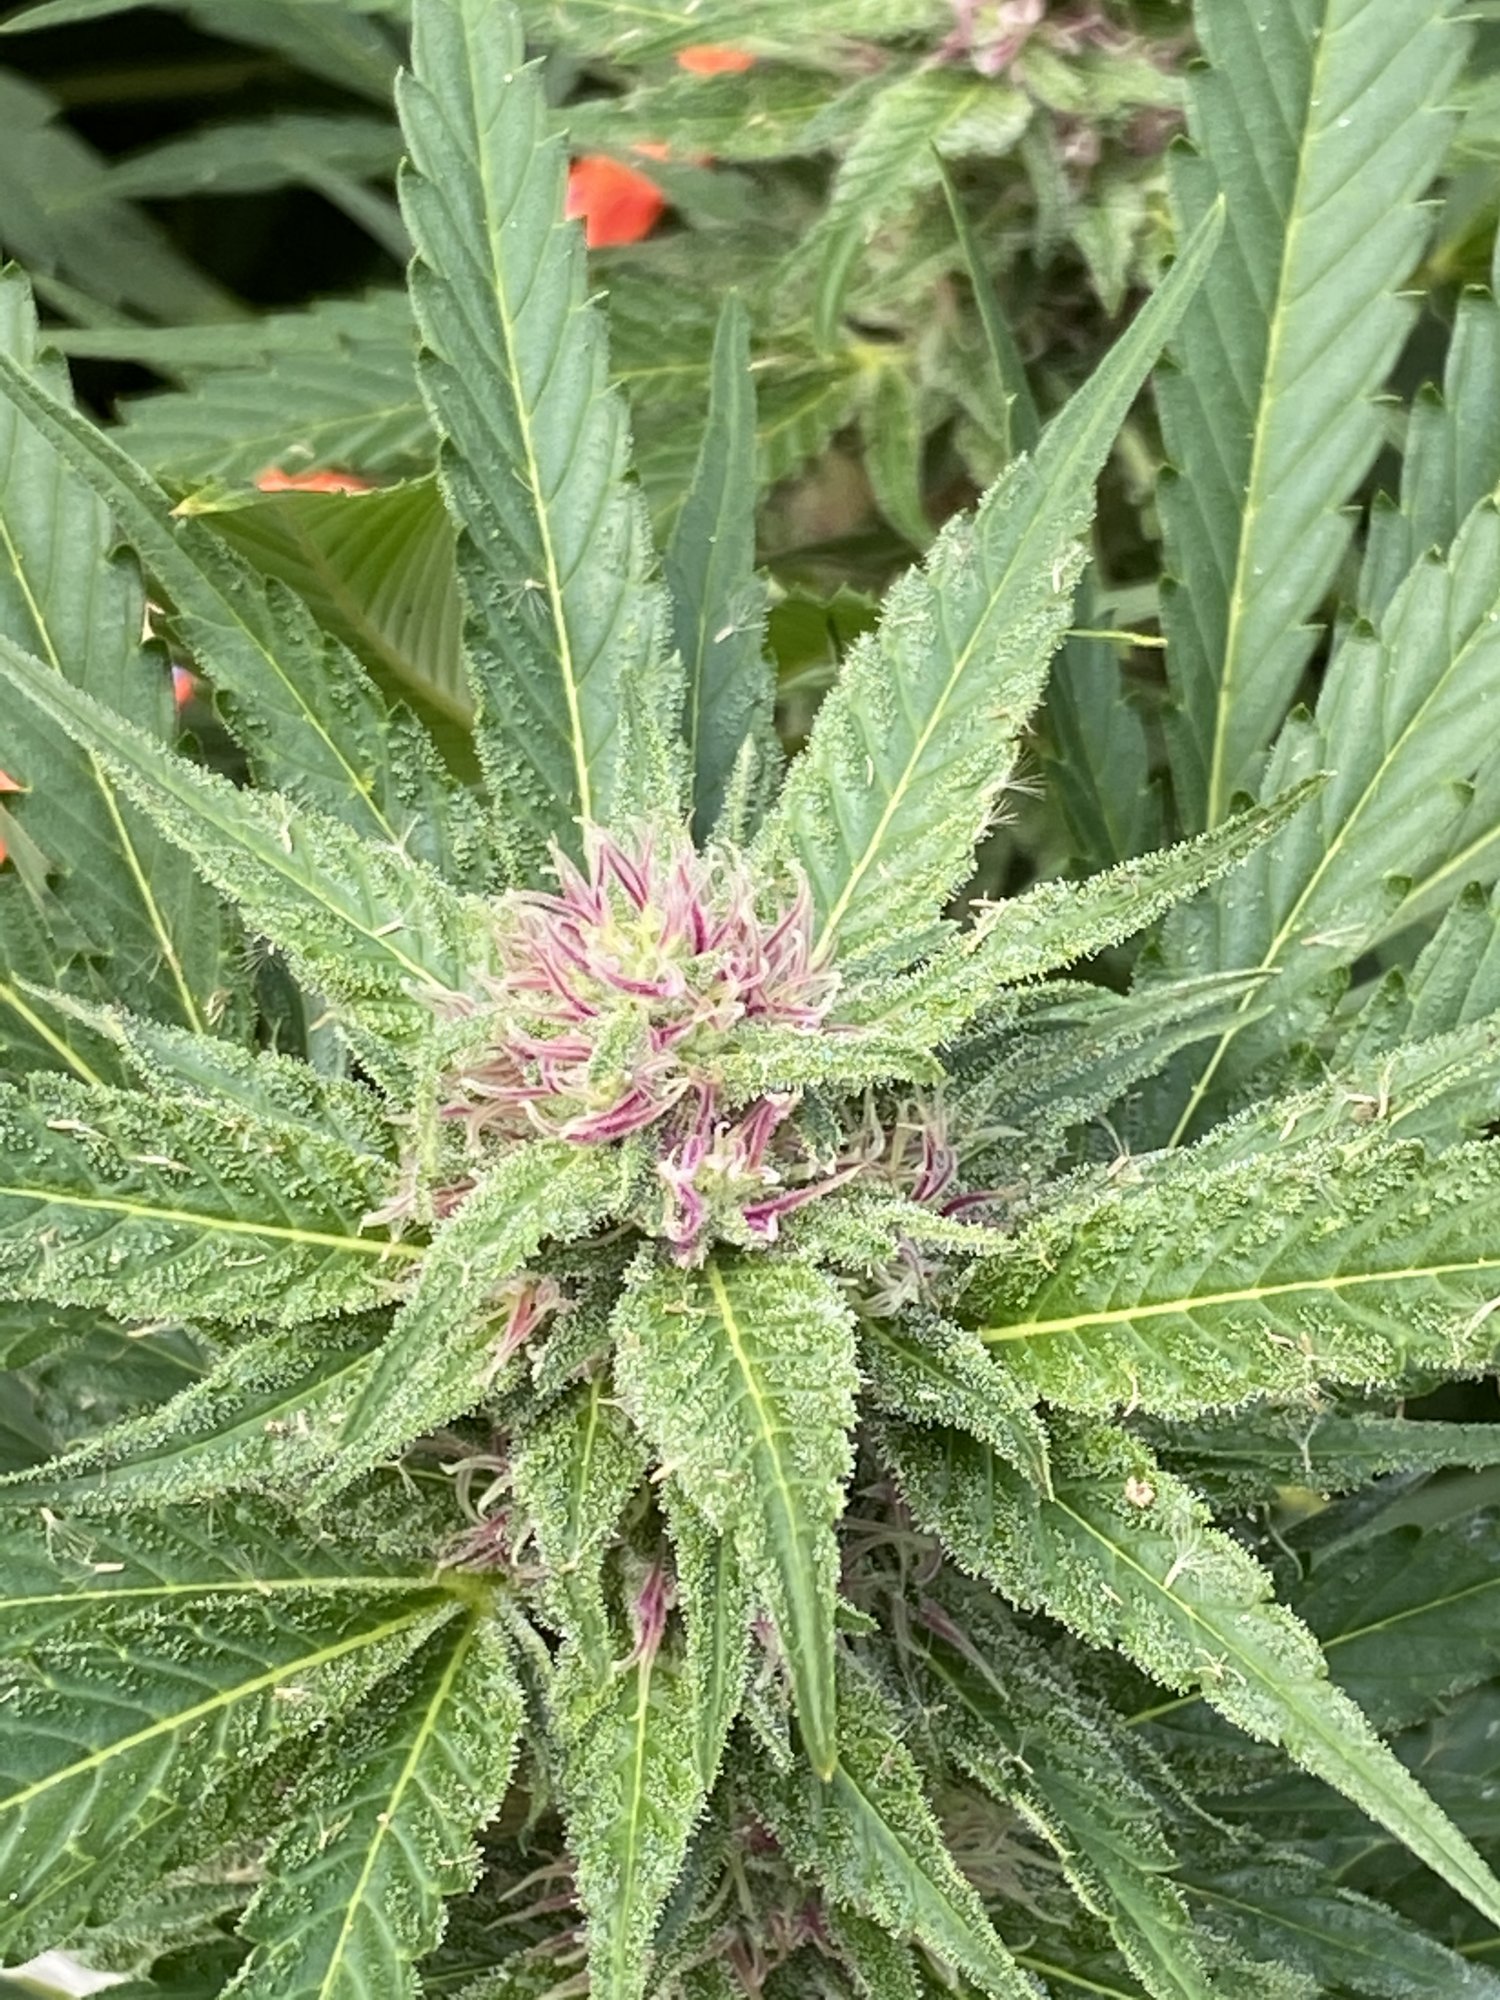 My girls looking nice and pretty  getting frosty 3